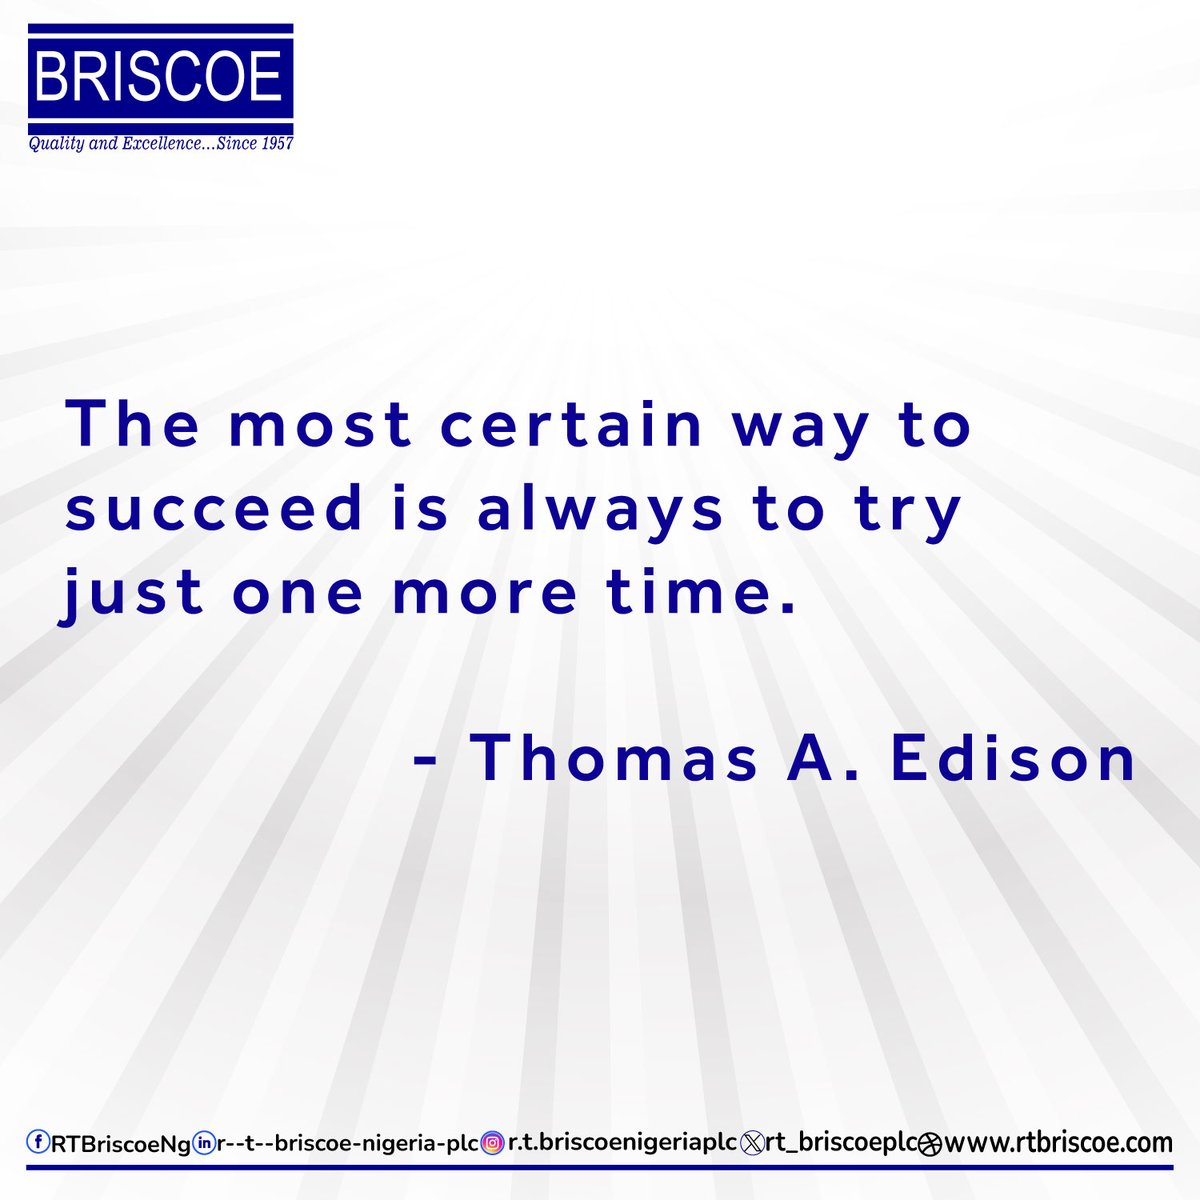 We are given a new chance to chase our goals and overcome new challenges. Never stop trying...

#newweek #newchallenge #keepmoving #monday #mondaymotivation #thomasedison #rtbriscoenigeriaplc